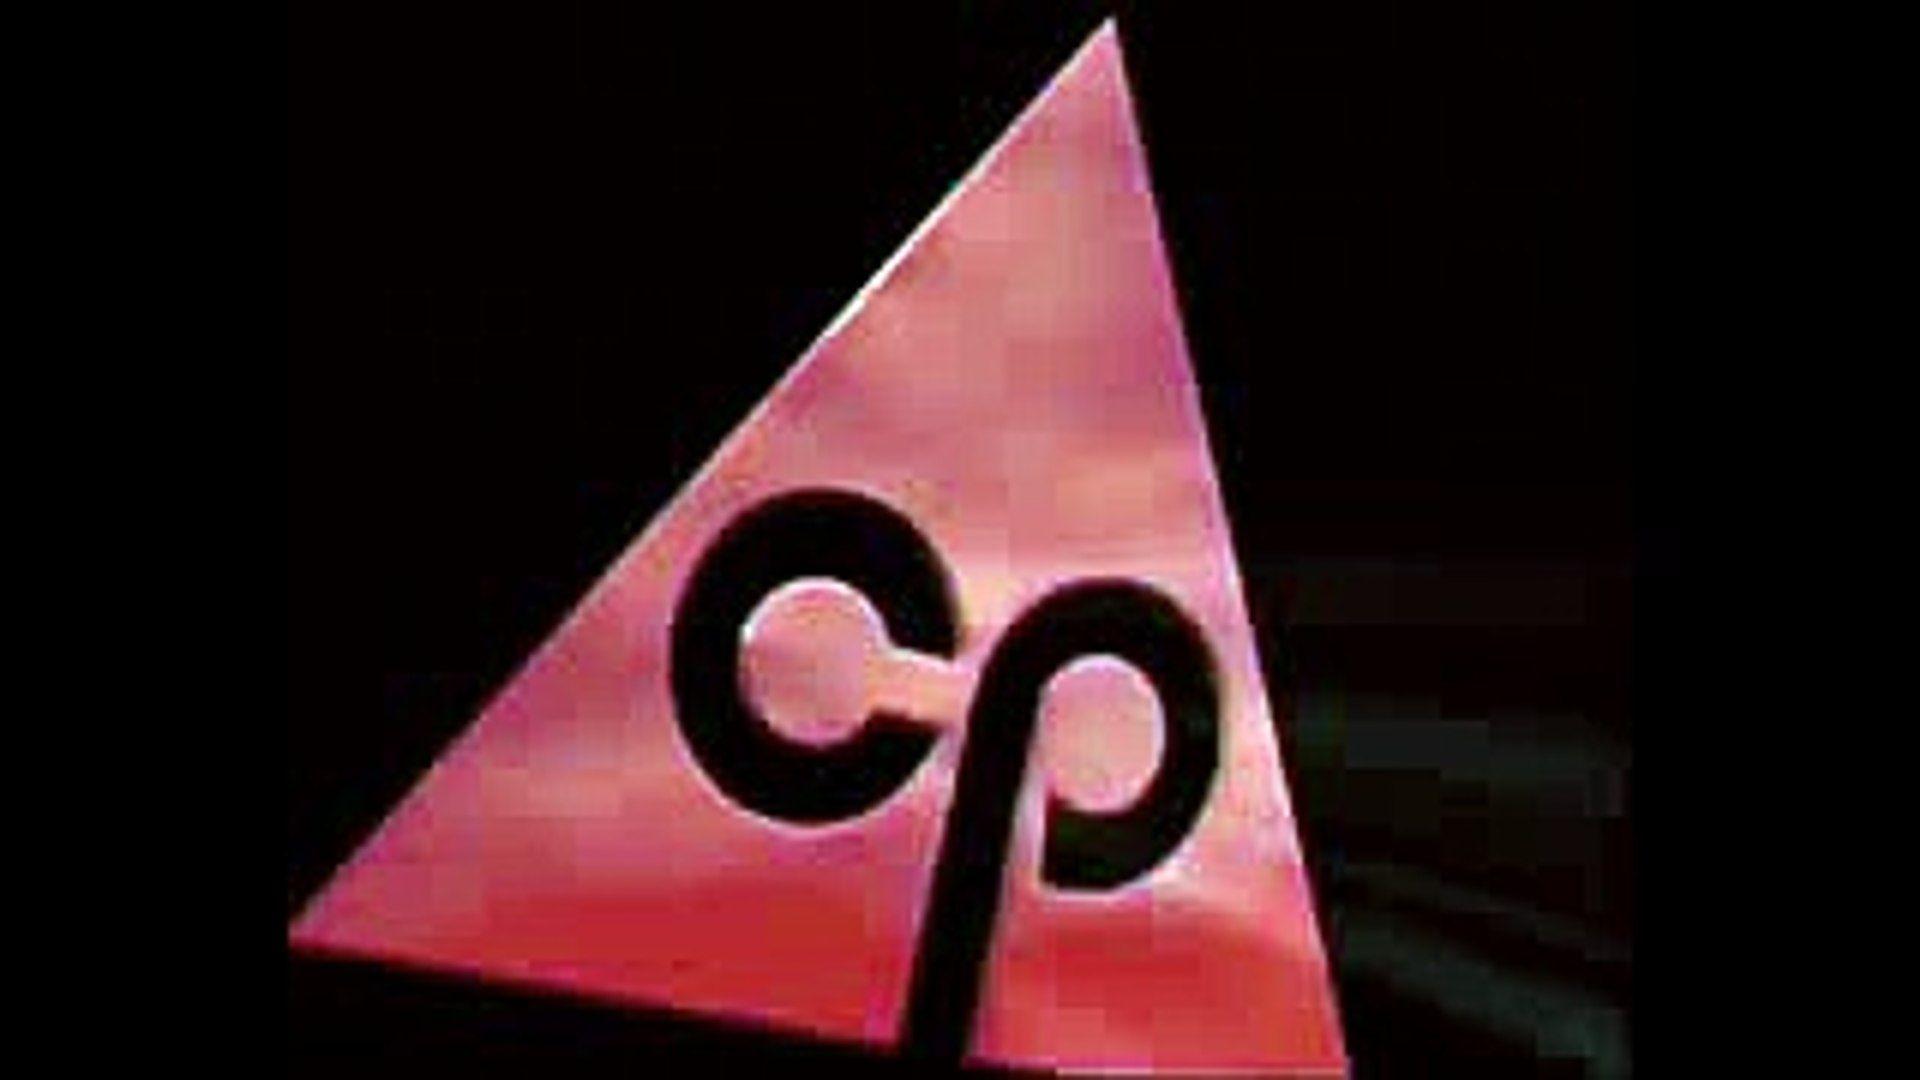 Macrovision Logo - Here Is The Very Short CP Macro Vision Logo You Would Ever See!